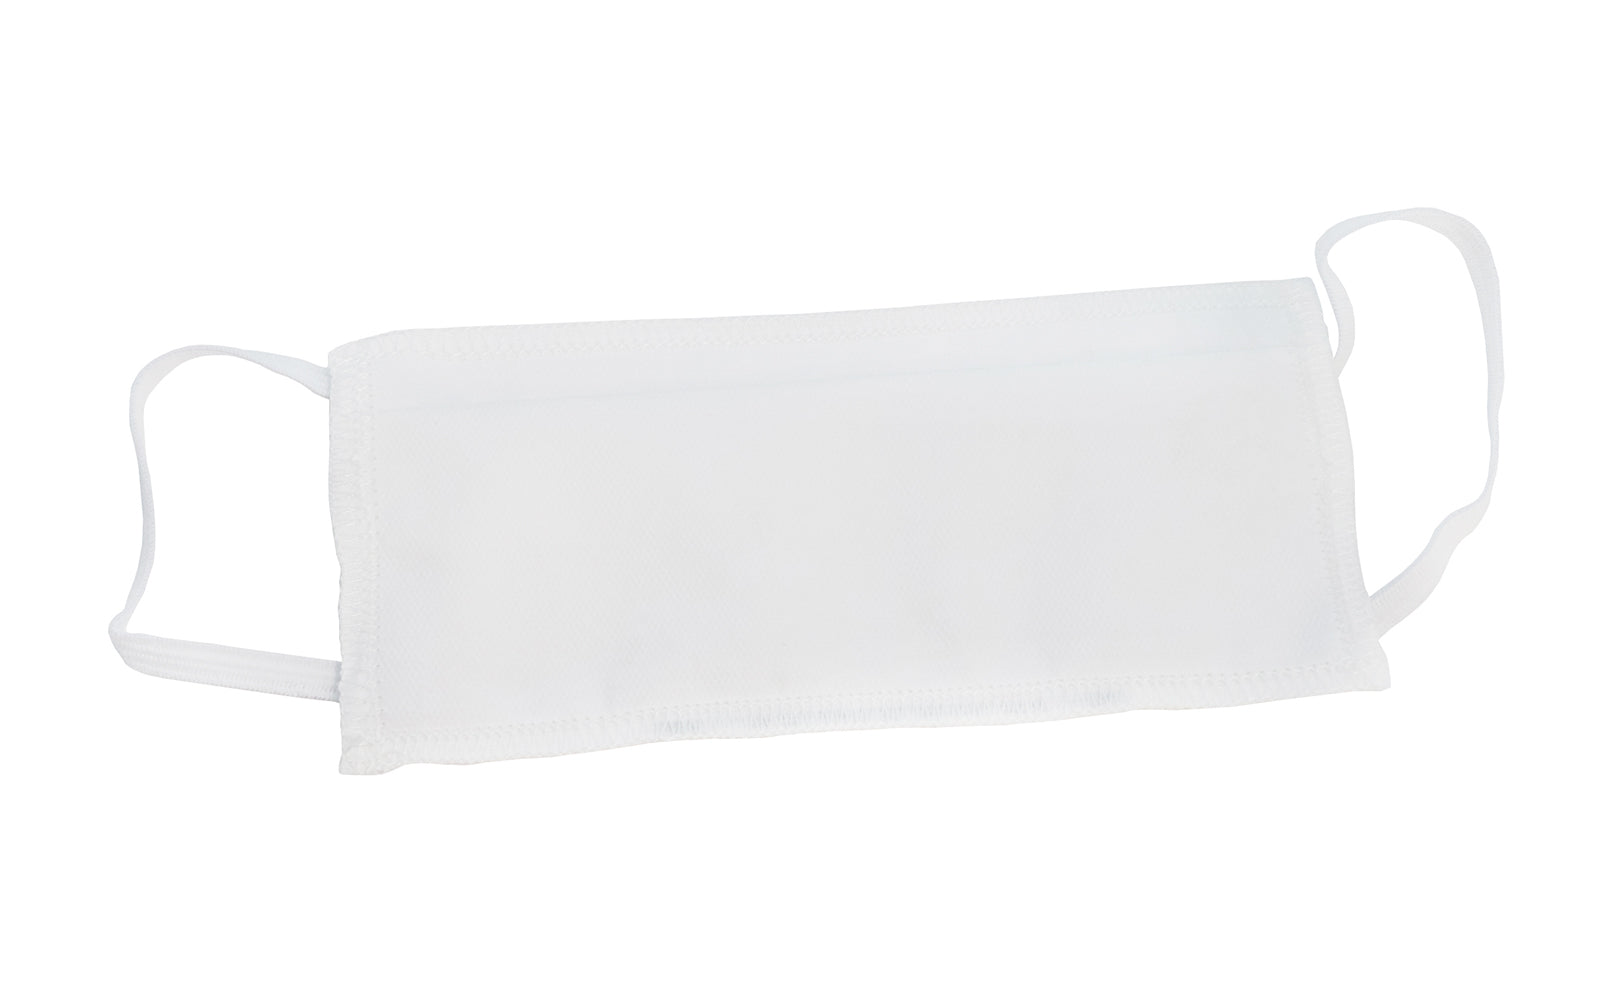 Cotton Face Mask. One layer is premium bleached cotton fabric. Dual filtration from 2 ply of material. Non-woven polyester layer is water resistant: AAMI Class 1 & 2 certified for vapor penetration. Sewn in wire nose piece enhances fit. Pleated for complete covering of nose & mouth. Washable & reusable.  Dico 7600500. Made in USA. 082123760504